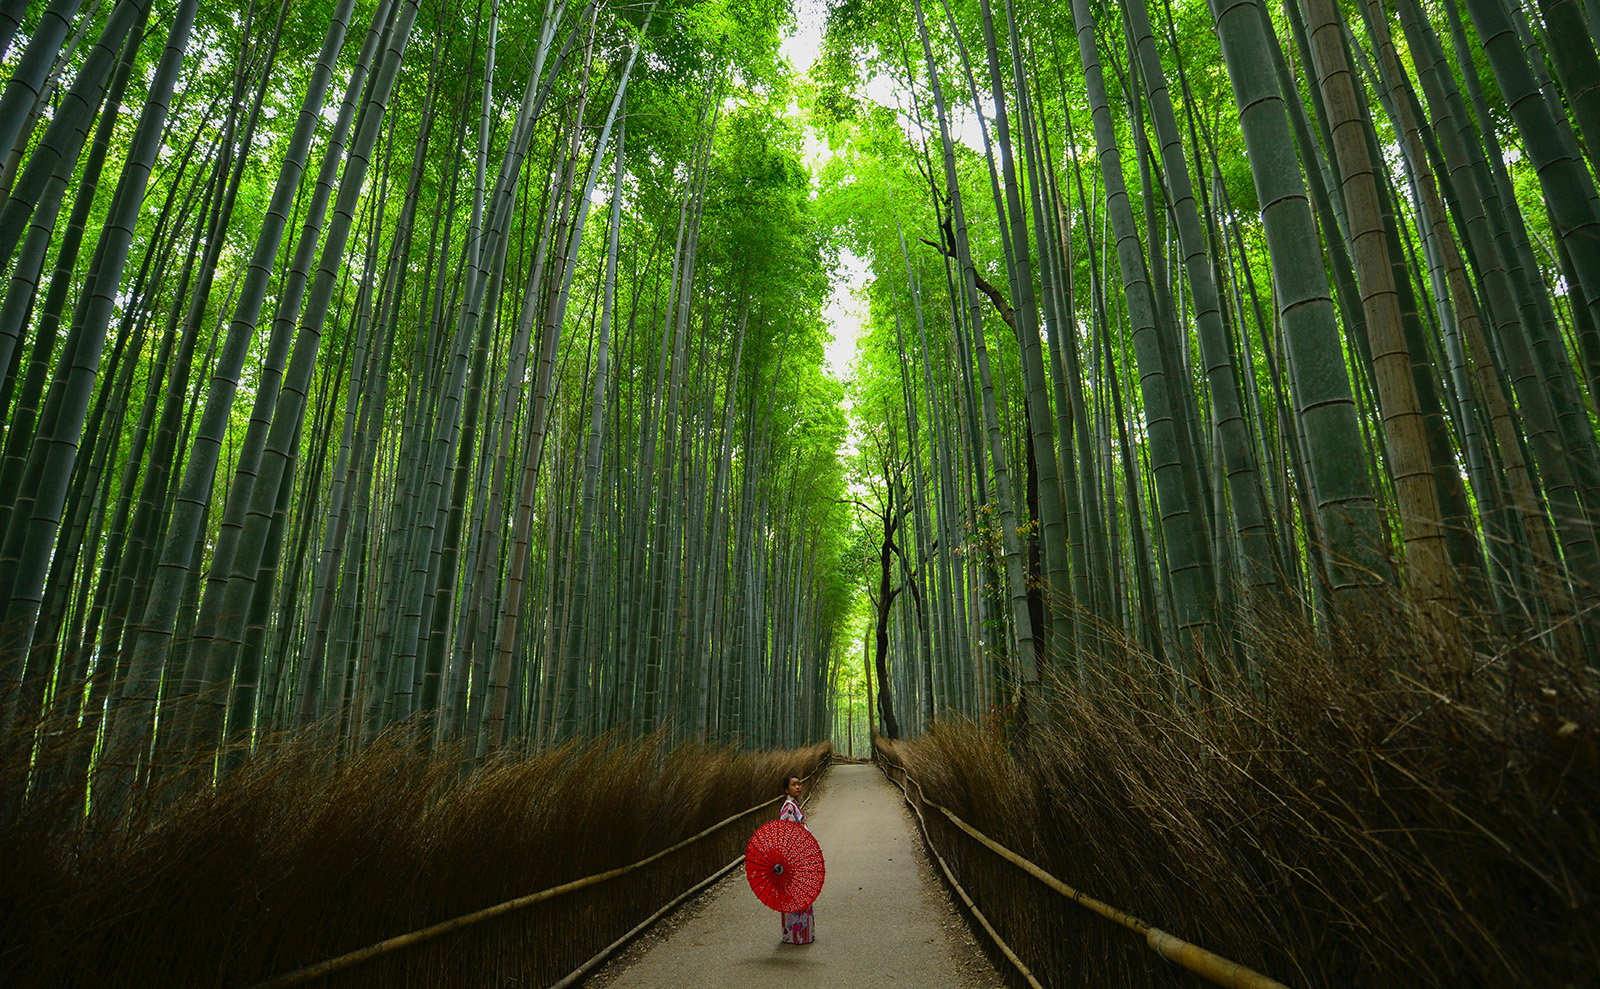 Postcards from Japan: Bamboo, Temples, Monkeys, and More